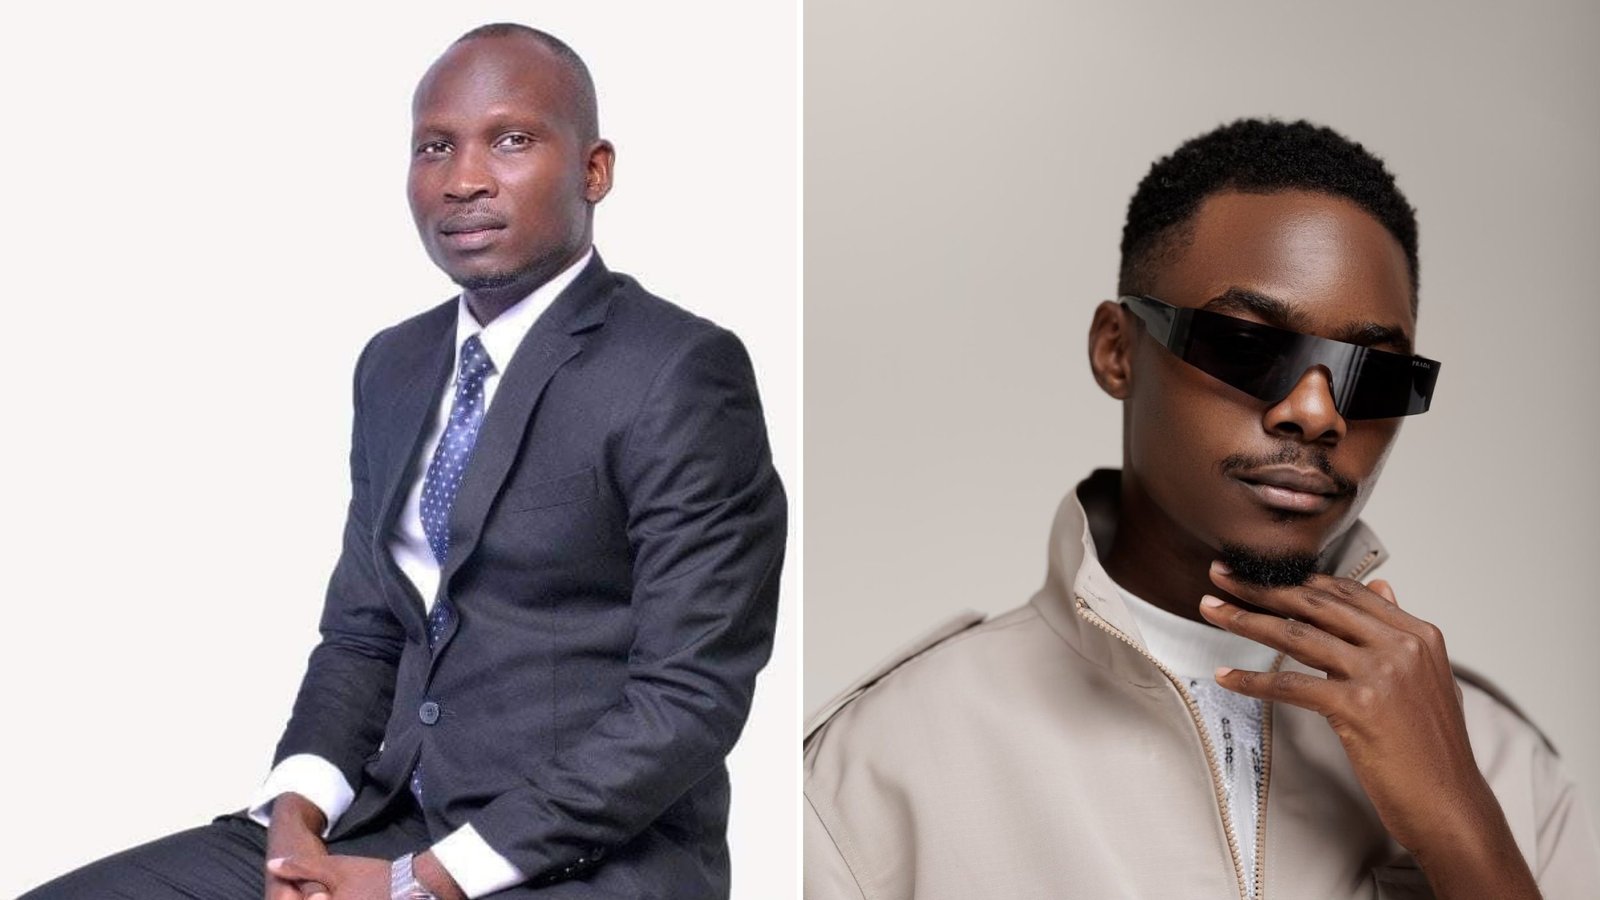 promoter-accuses-ray-g-of-betrayal-before-concert,-threatening-legal-action